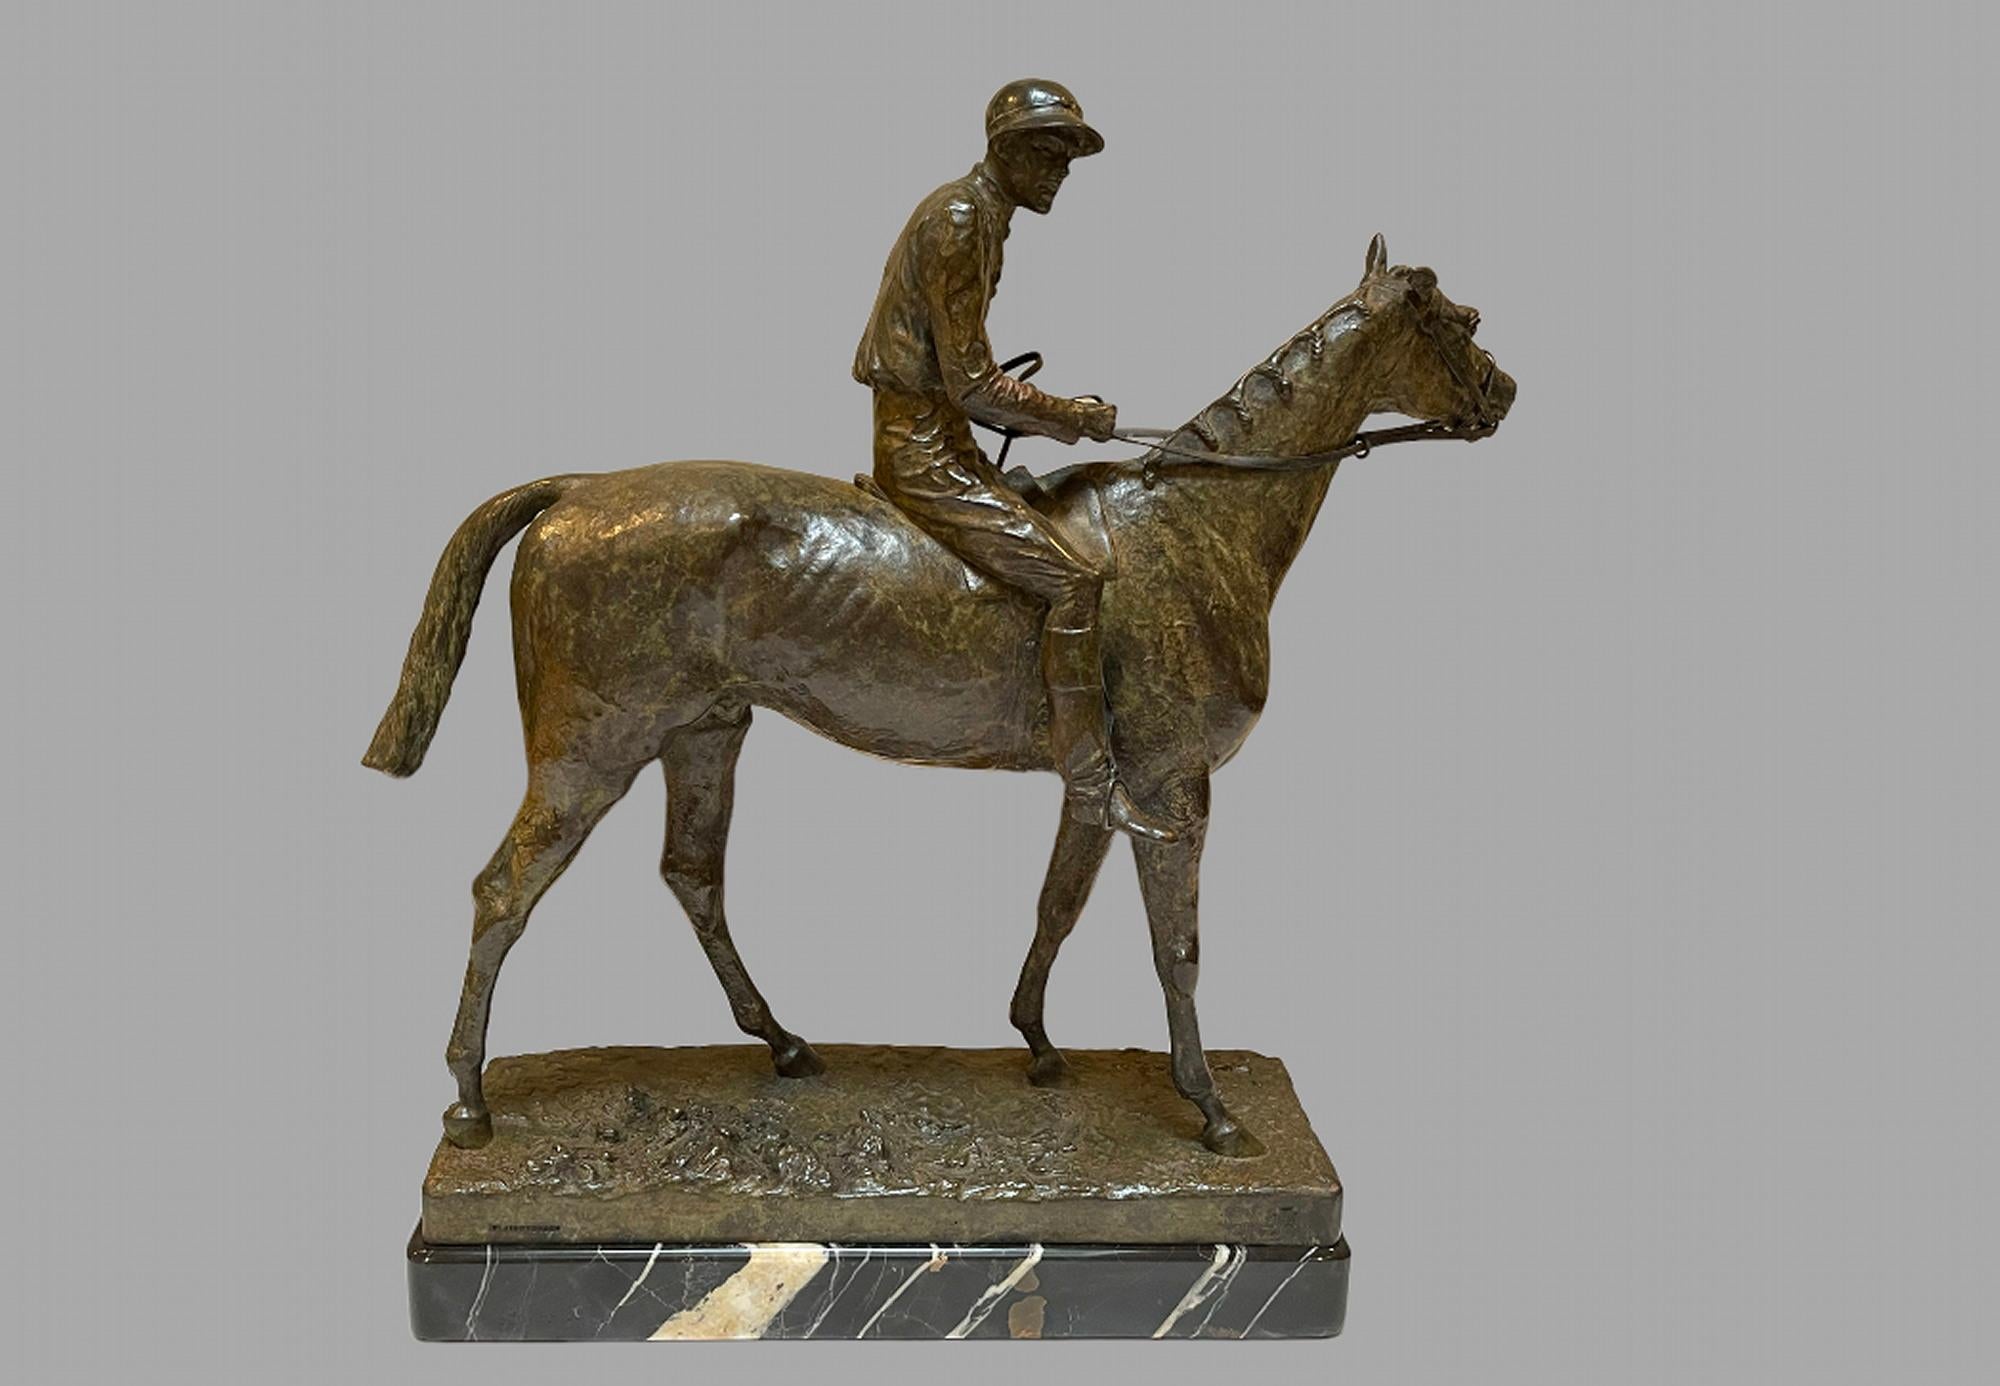 Adrian Jones (1845-1938) A patinated bronze figure of Fred Archer on Ormonde. Mounted on a Portoro Nero marble base. Incised marks on the base - Elkington & co for the foundry and AJA (monogram for Adrian Jones)

Adrian Jones was a British